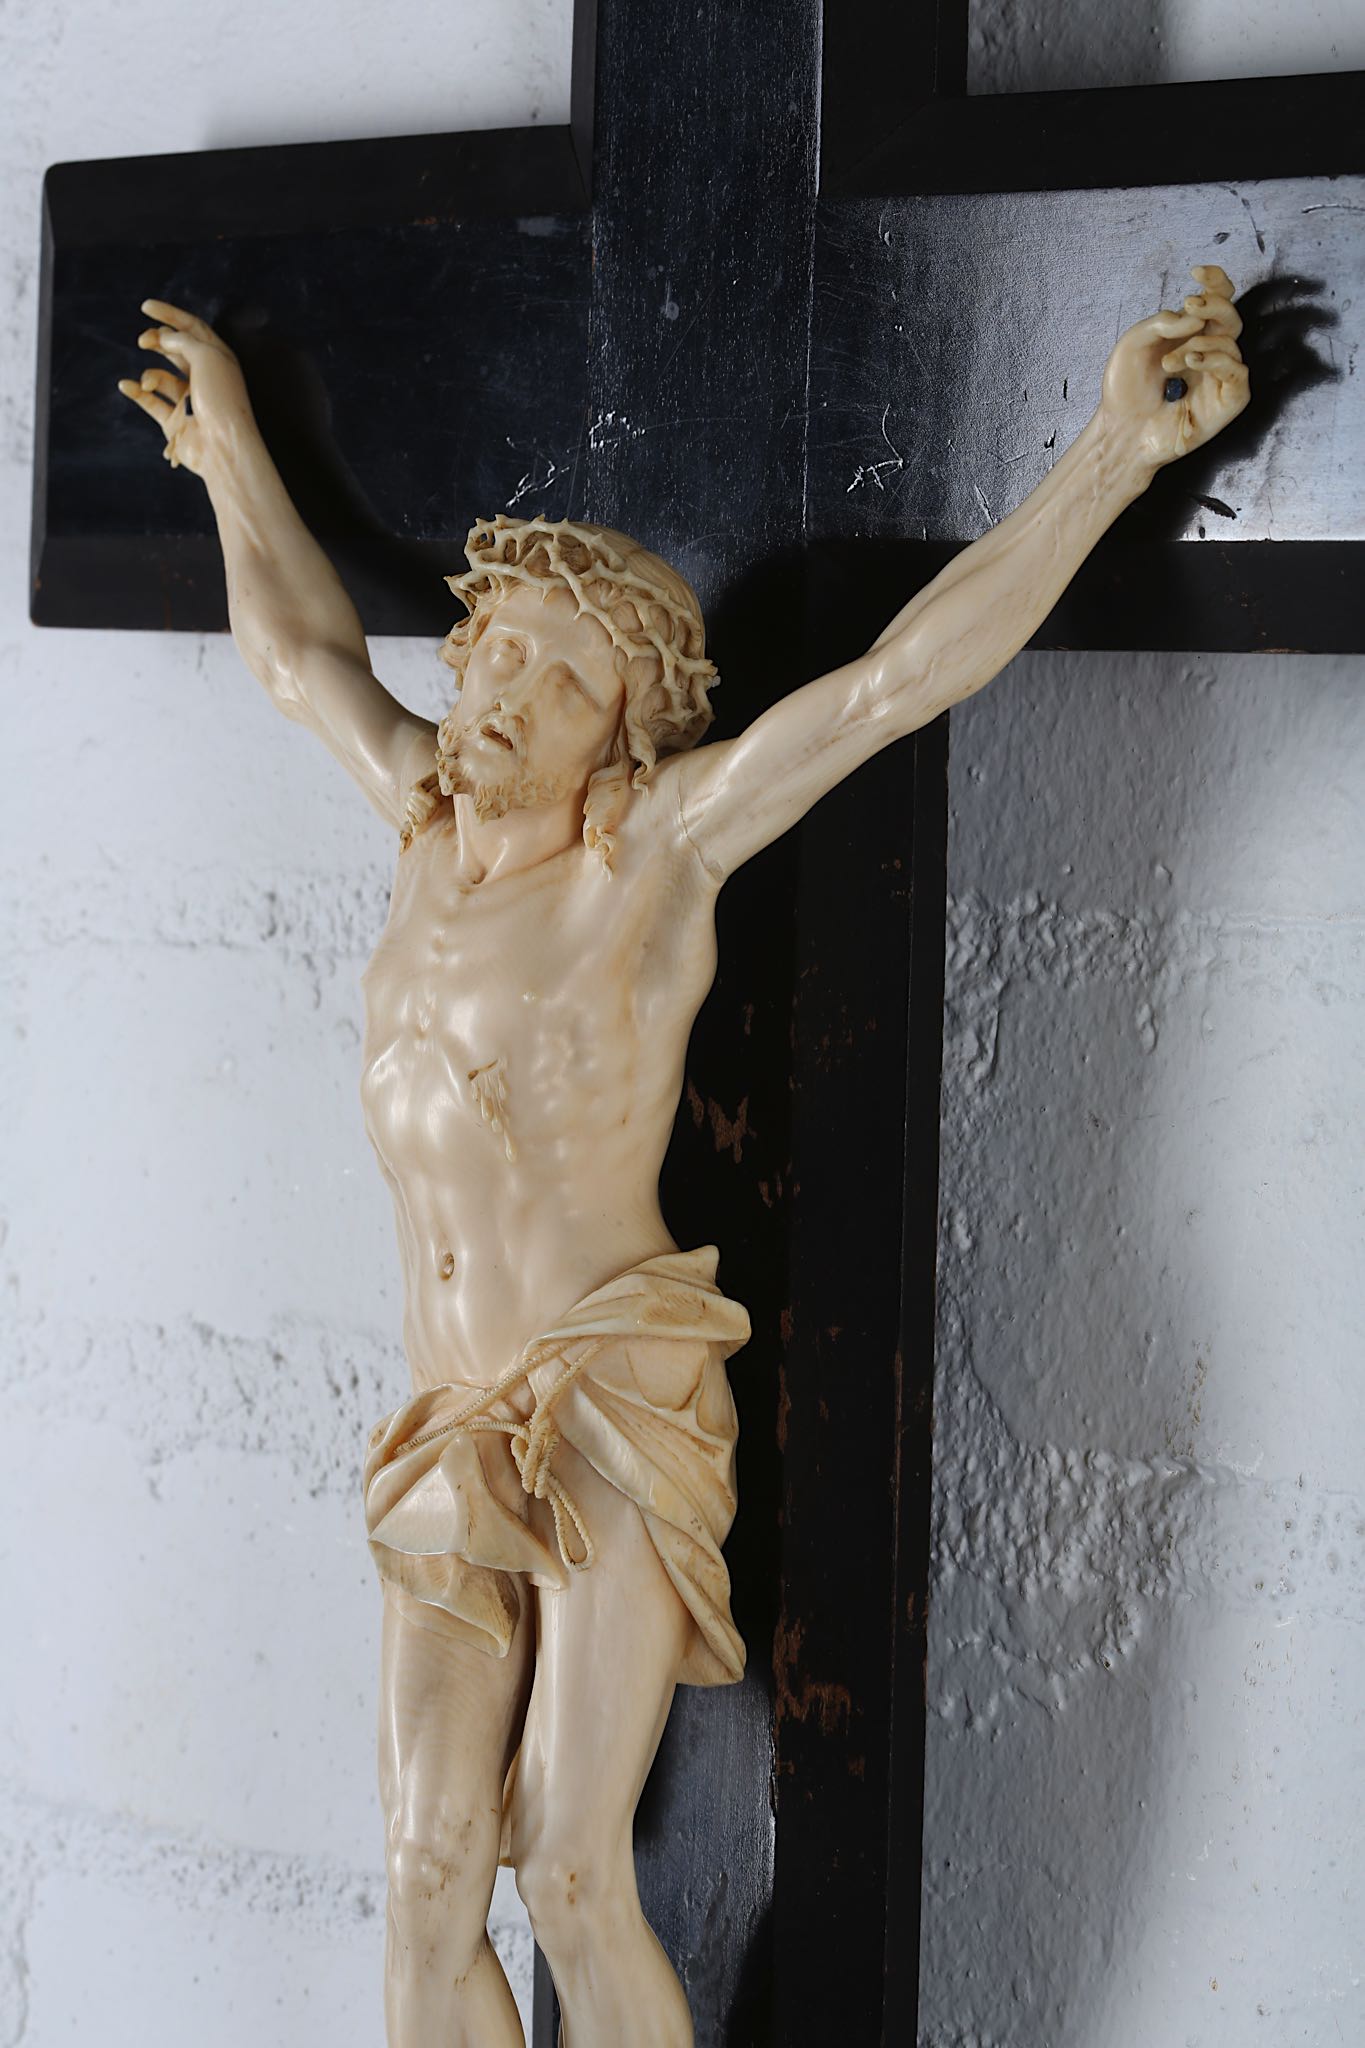 A 19TH CENTURY CARVED IVORY CRUCIFIX the Corpus Christi figure of Christ depicted wearing the - Image 5 of 6